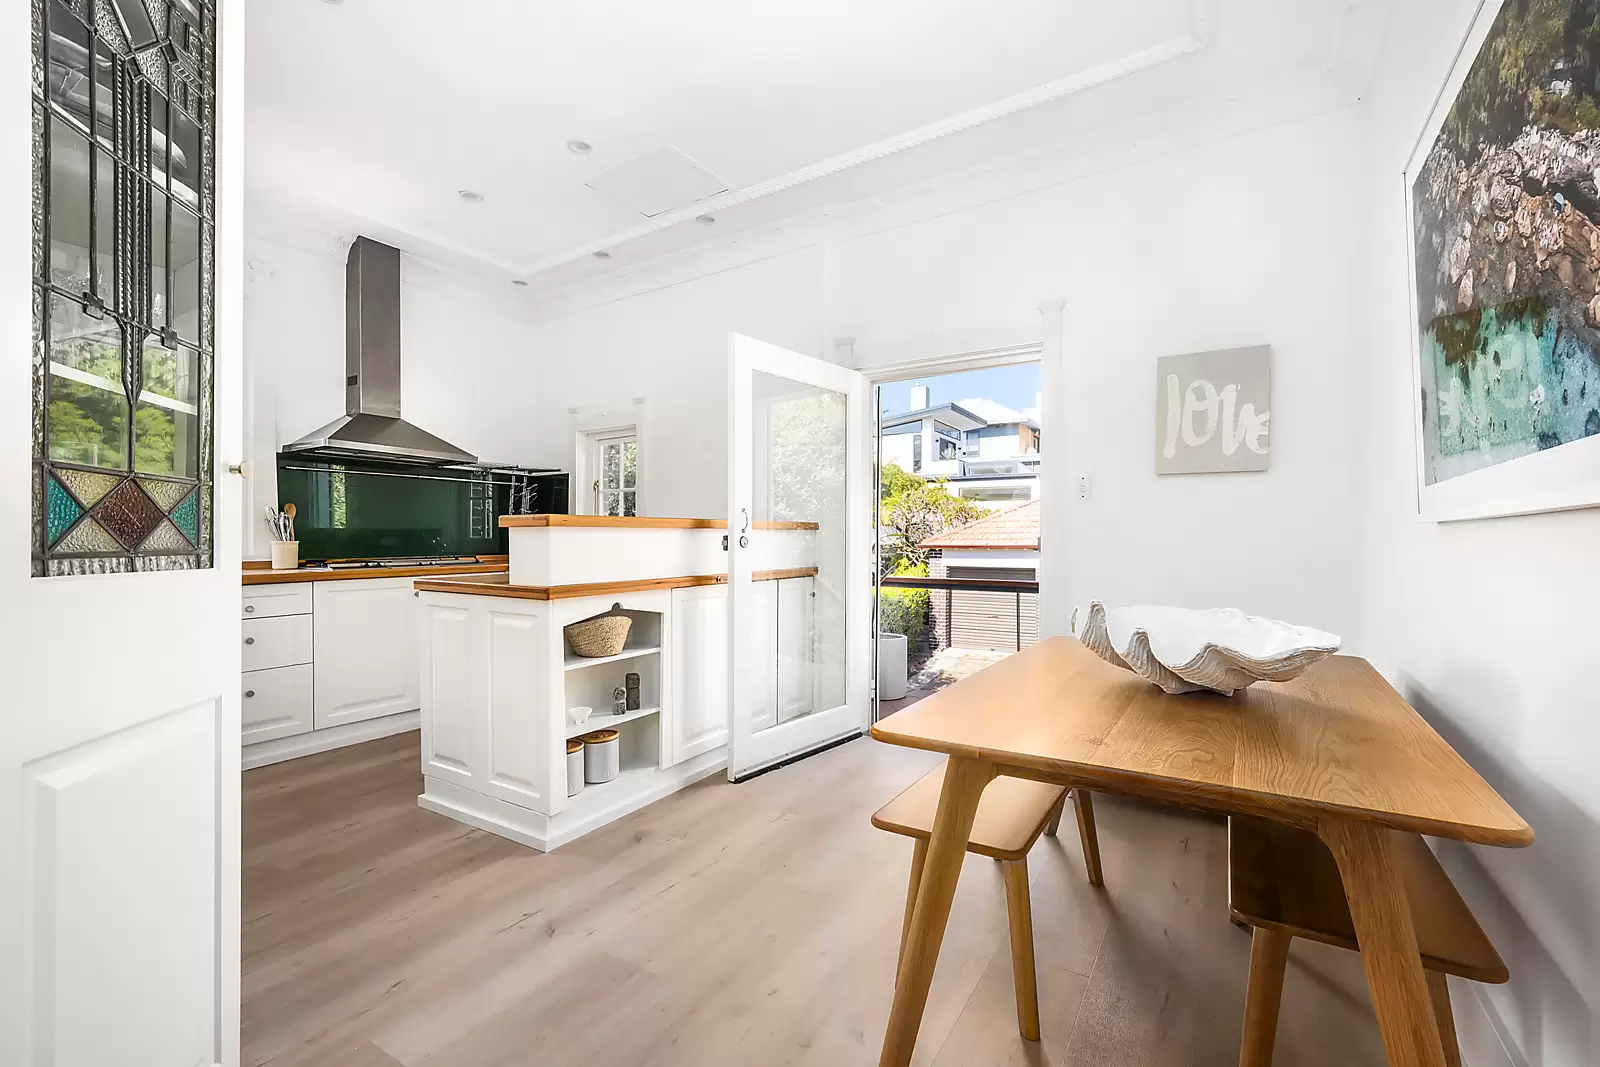 Photo #6: 3/11 Quail Street, Coogee - Sold by Sydney Sotheby's International Realty